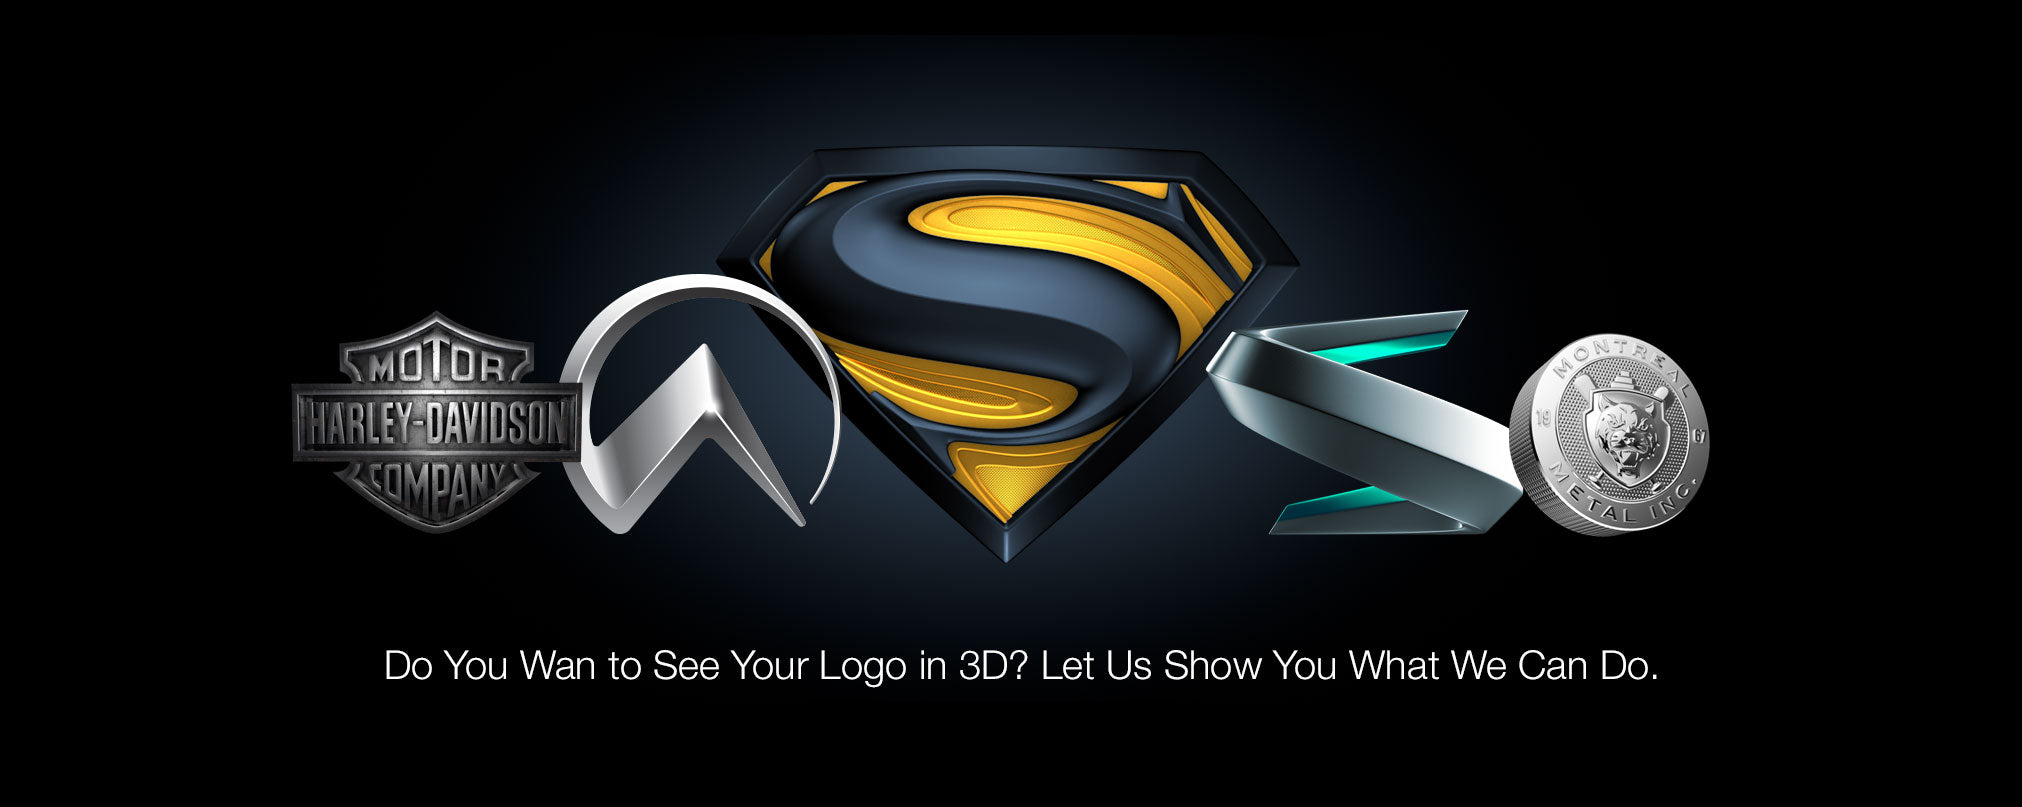 what is the best software to design a logo